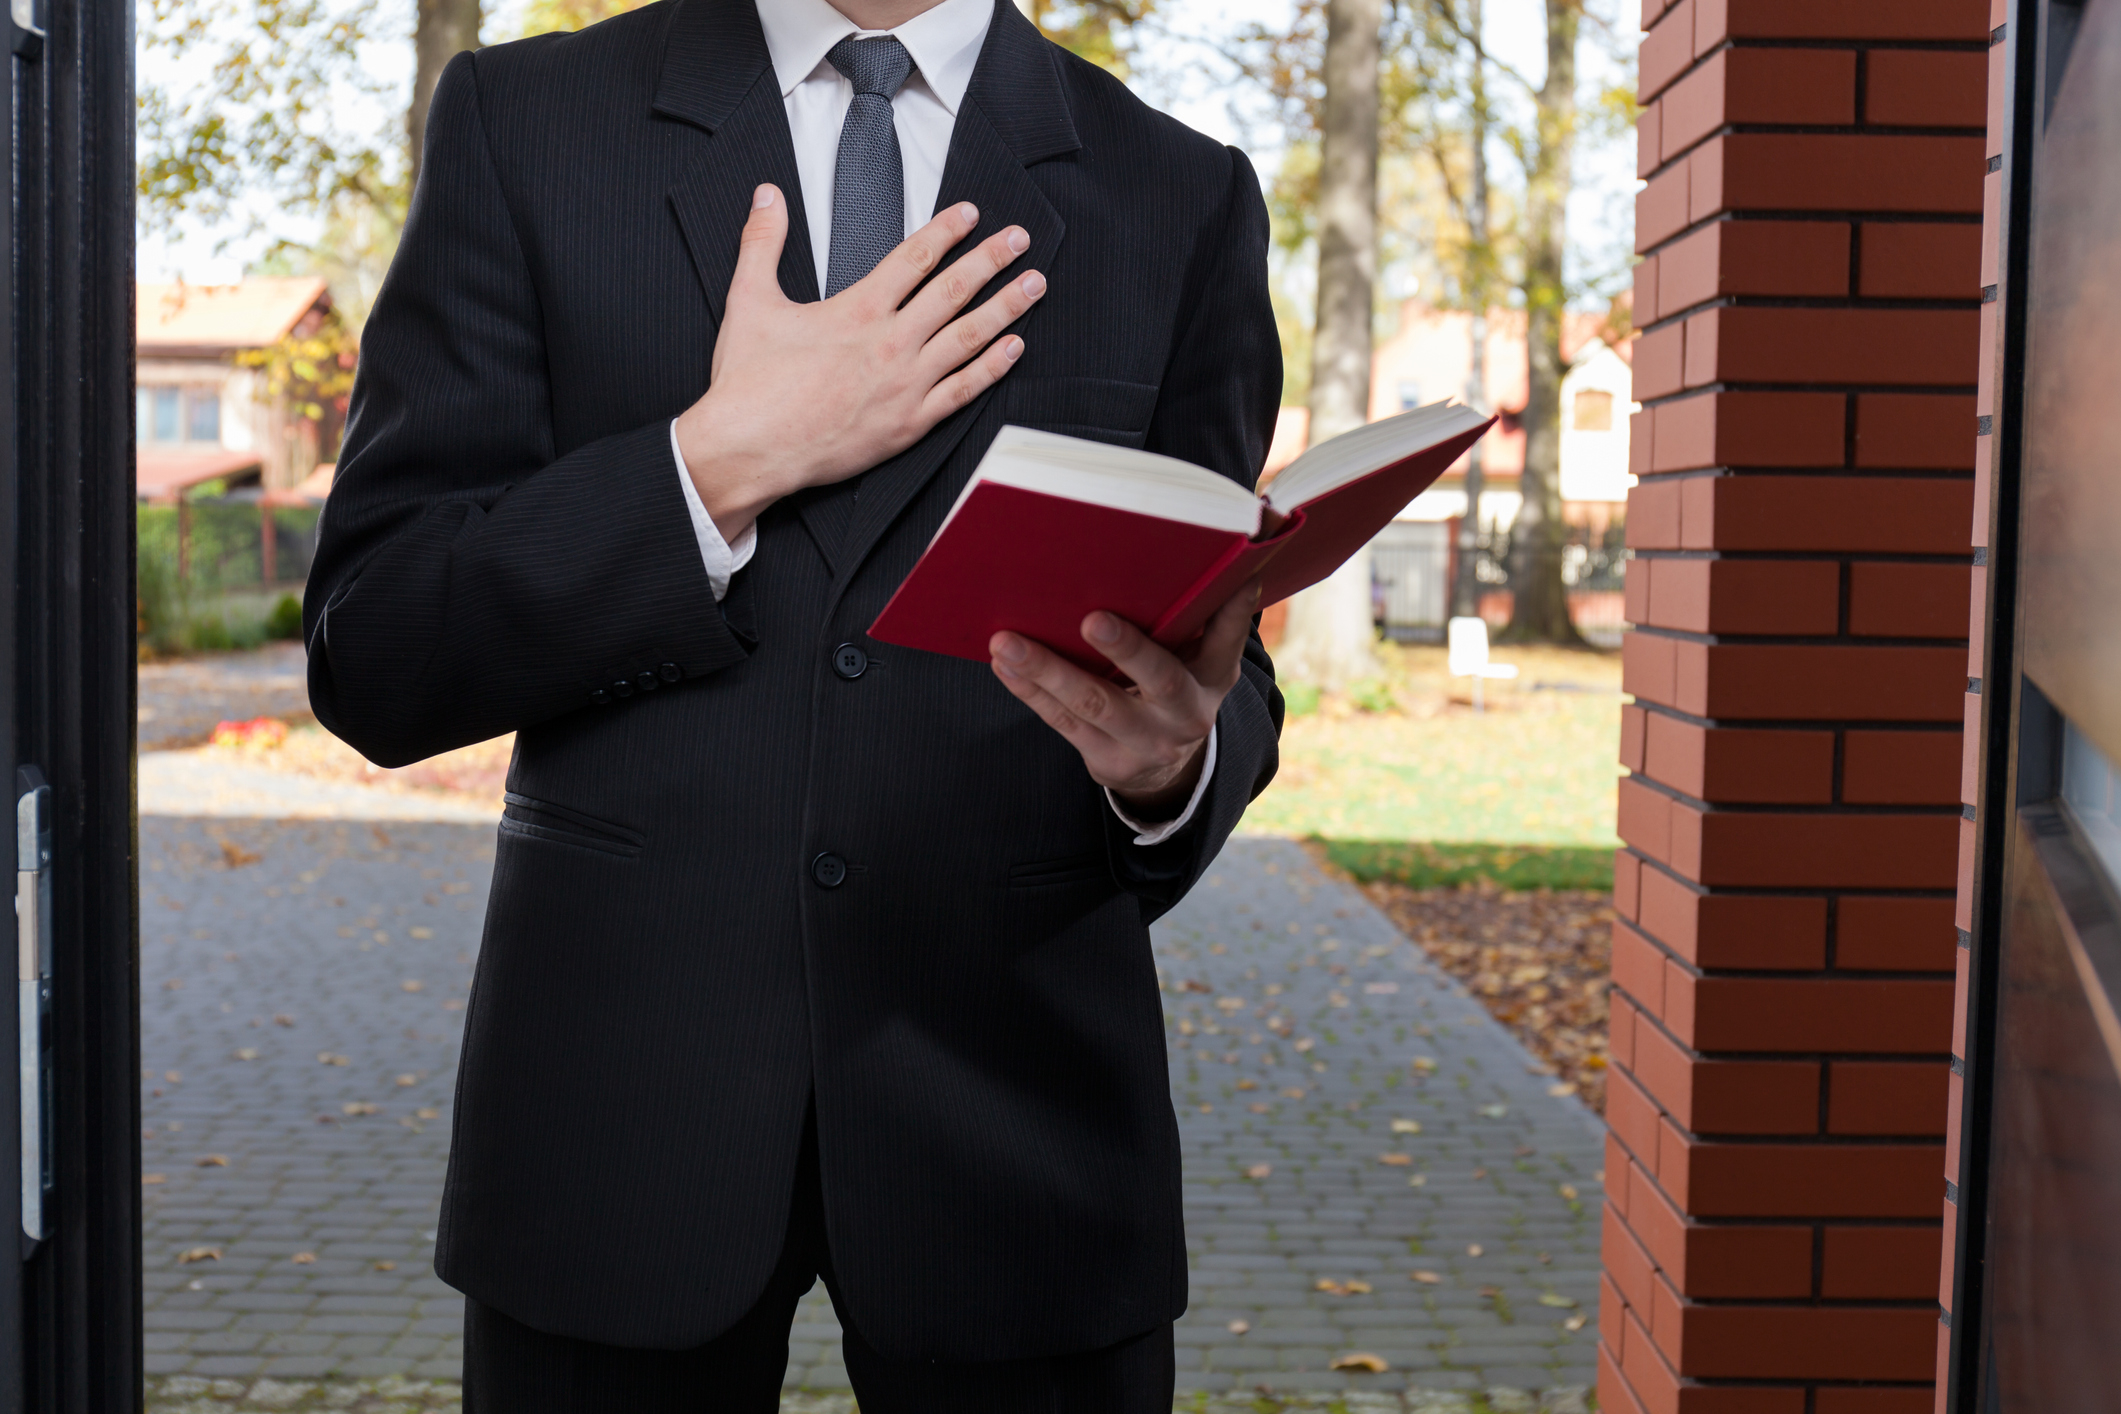 Person in suit reading book with hand on heart standing in doorway